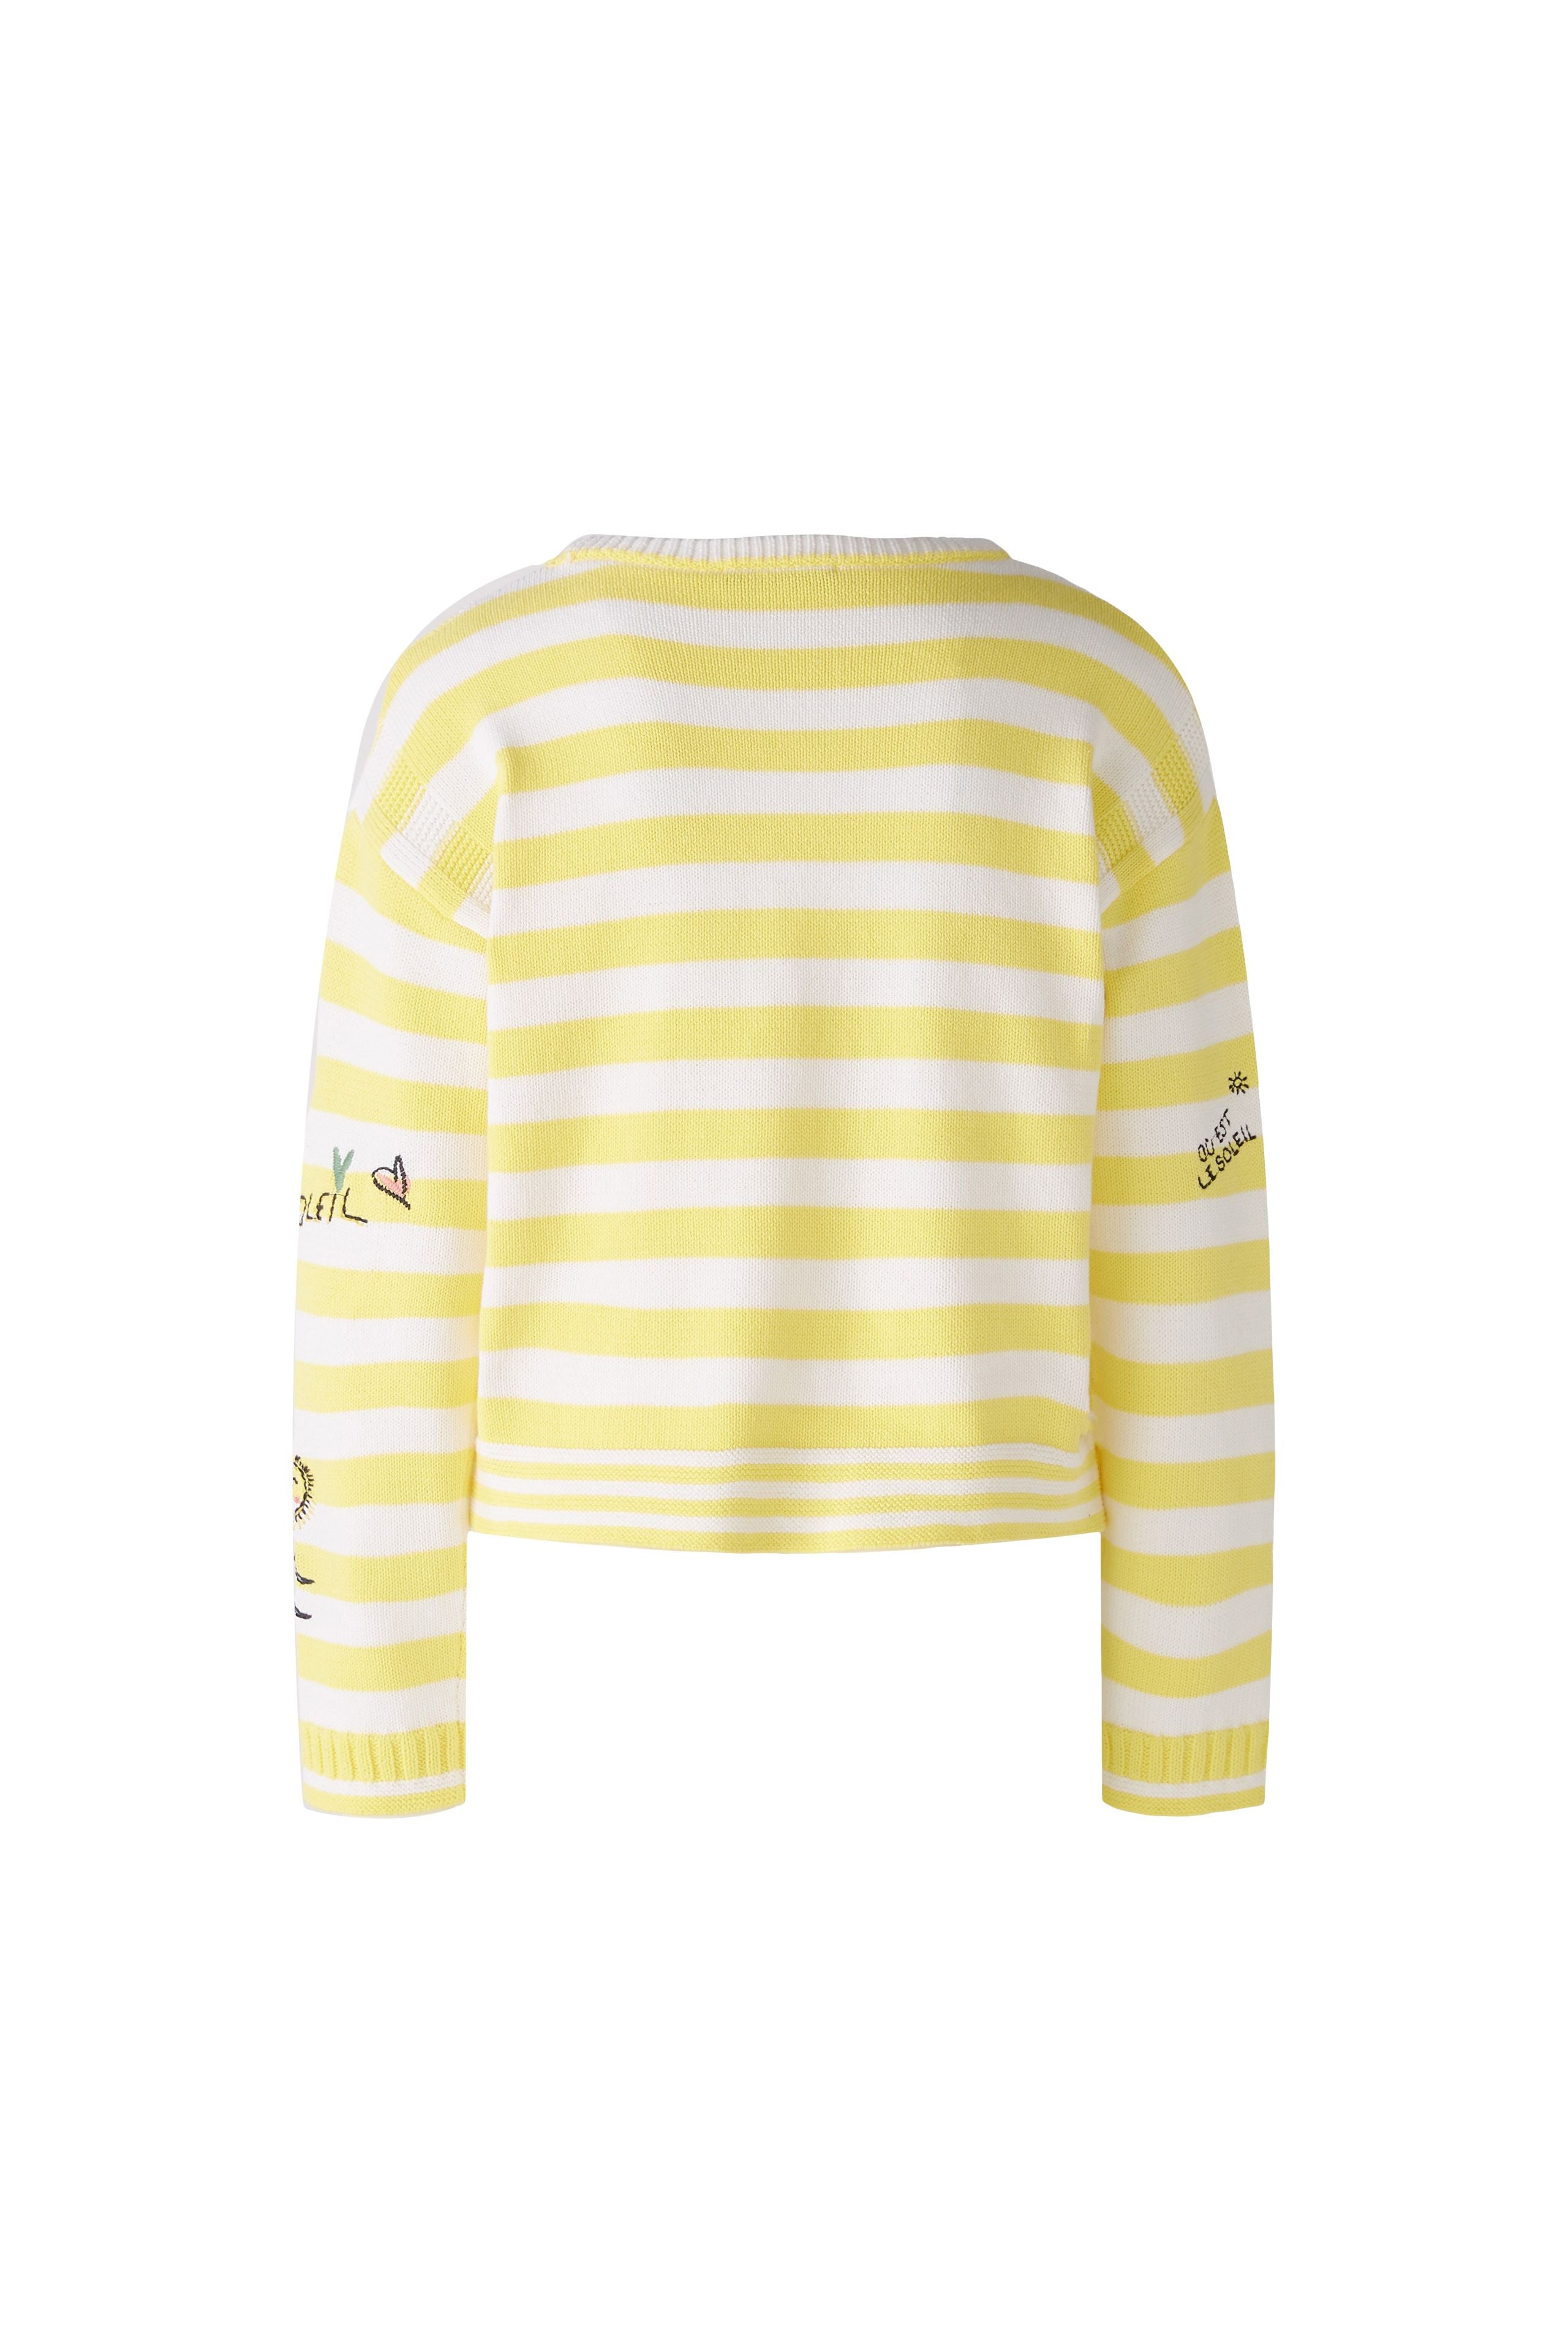 Patch Jumper in Yellow